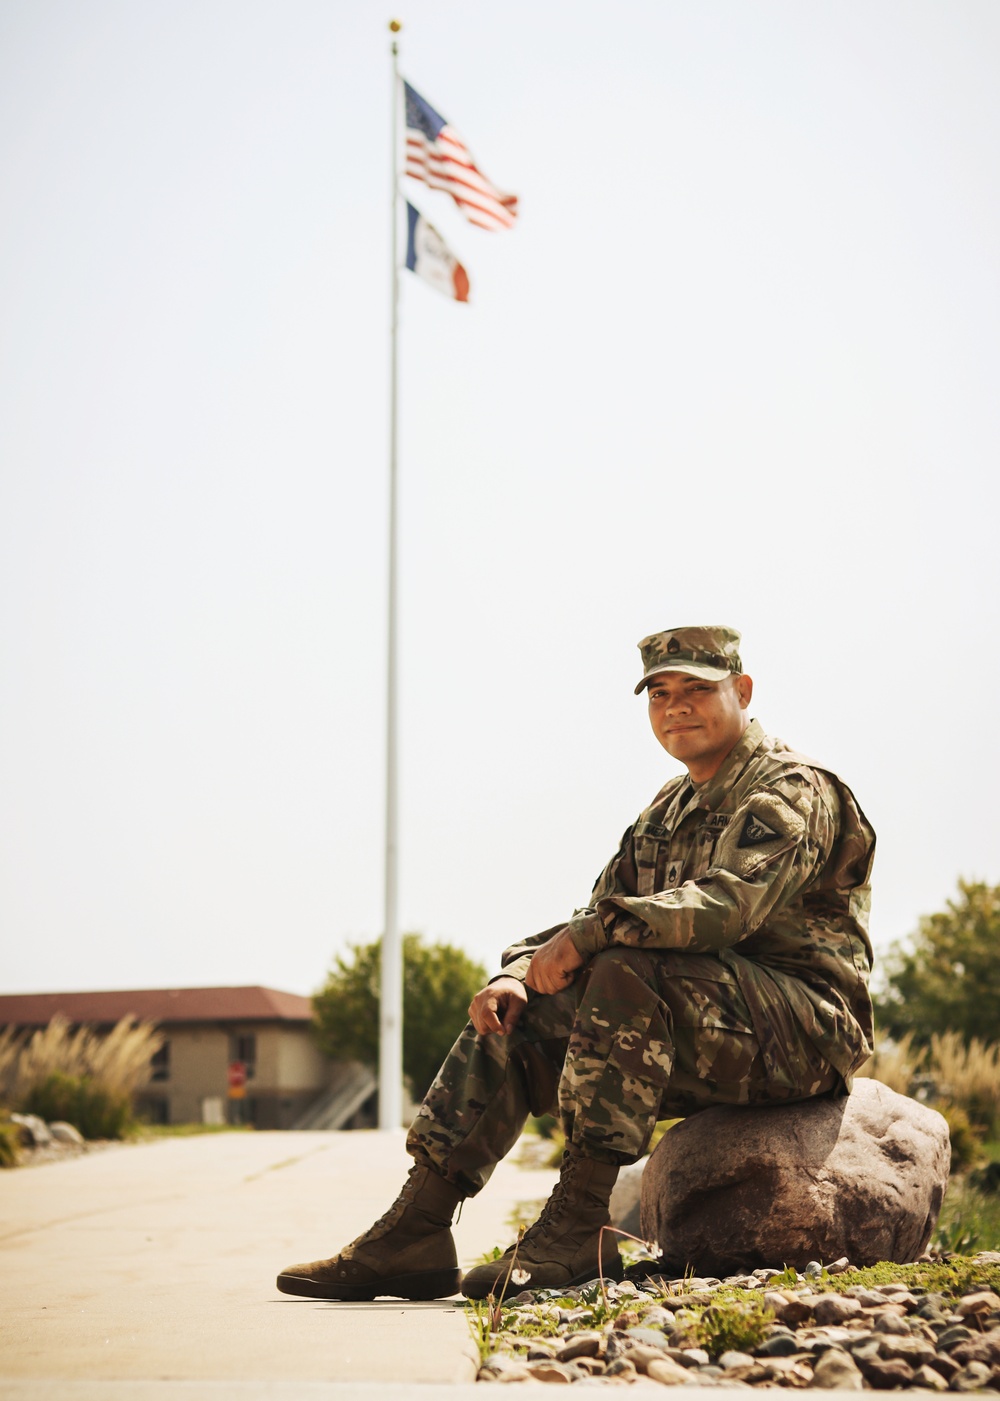 From Honduras to Iowa, National Guard Soldier reflects on his heritage